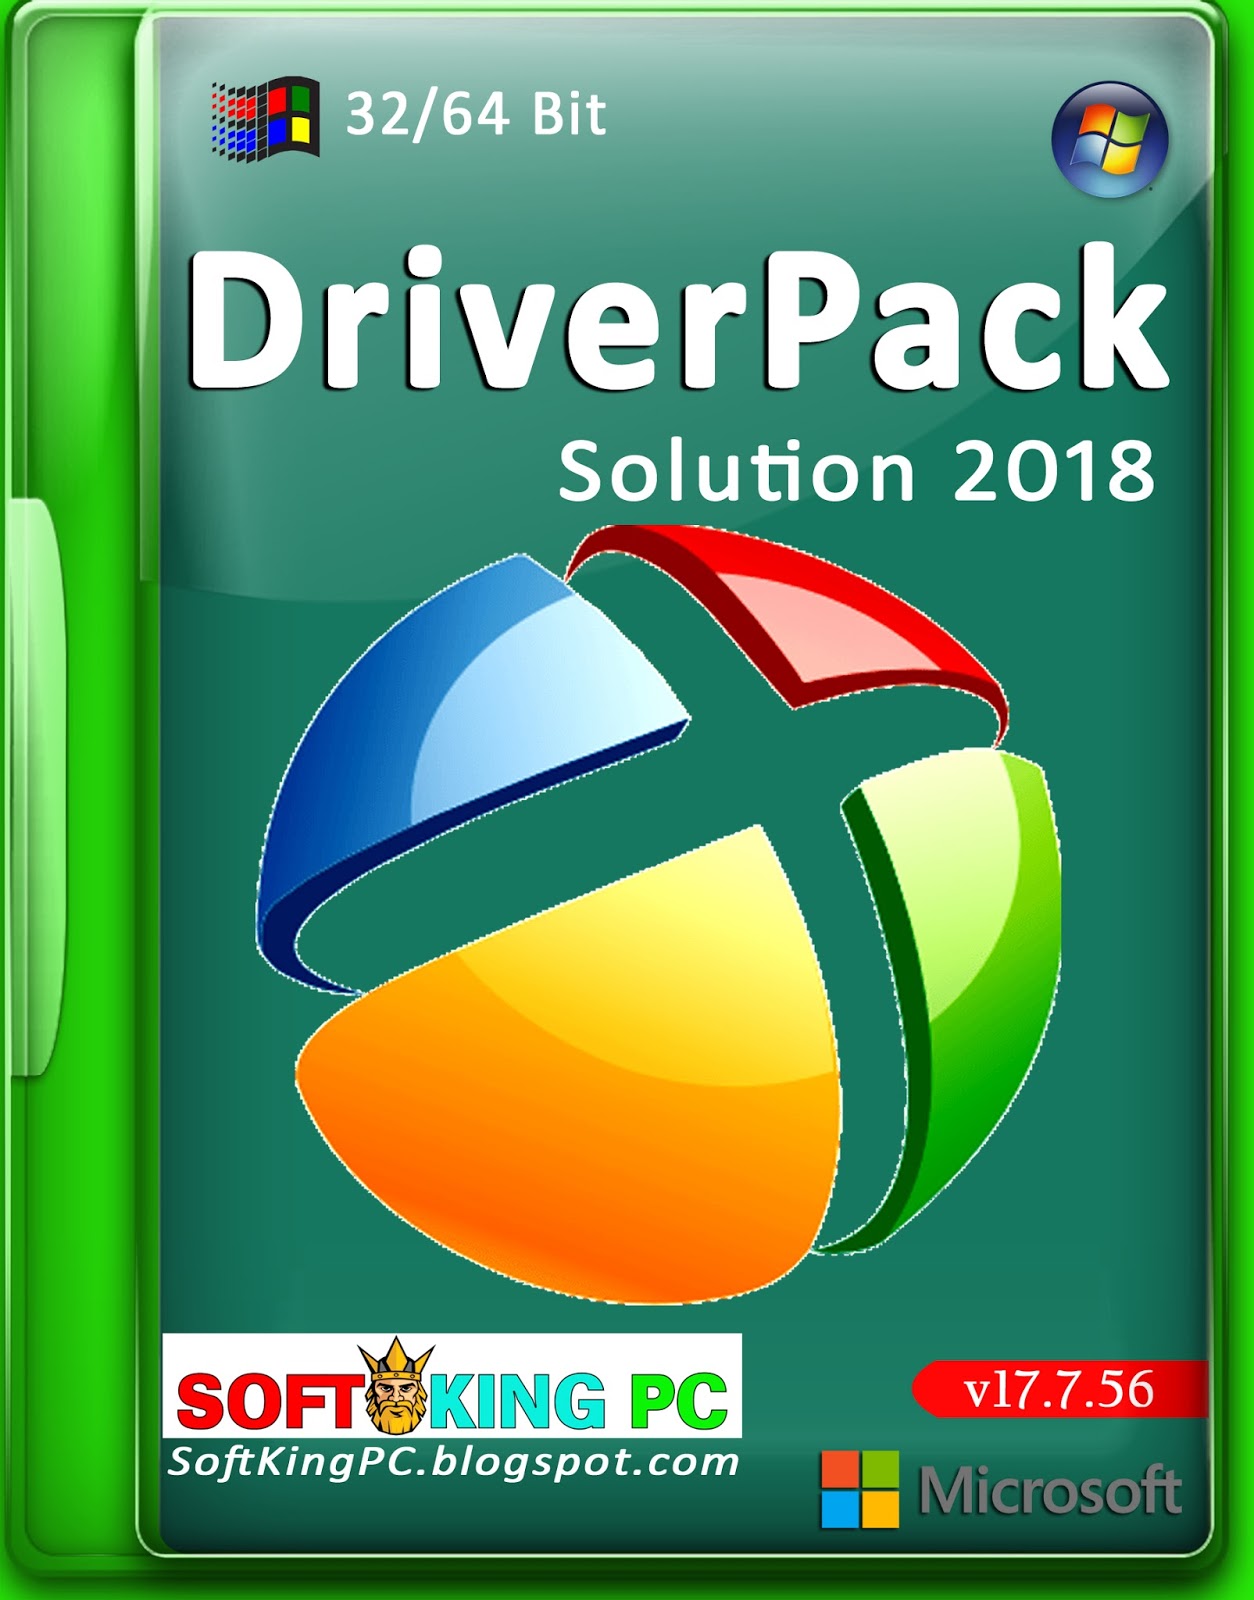 Driver Pack Solution 2018 Latest Version Download - SOFT ...